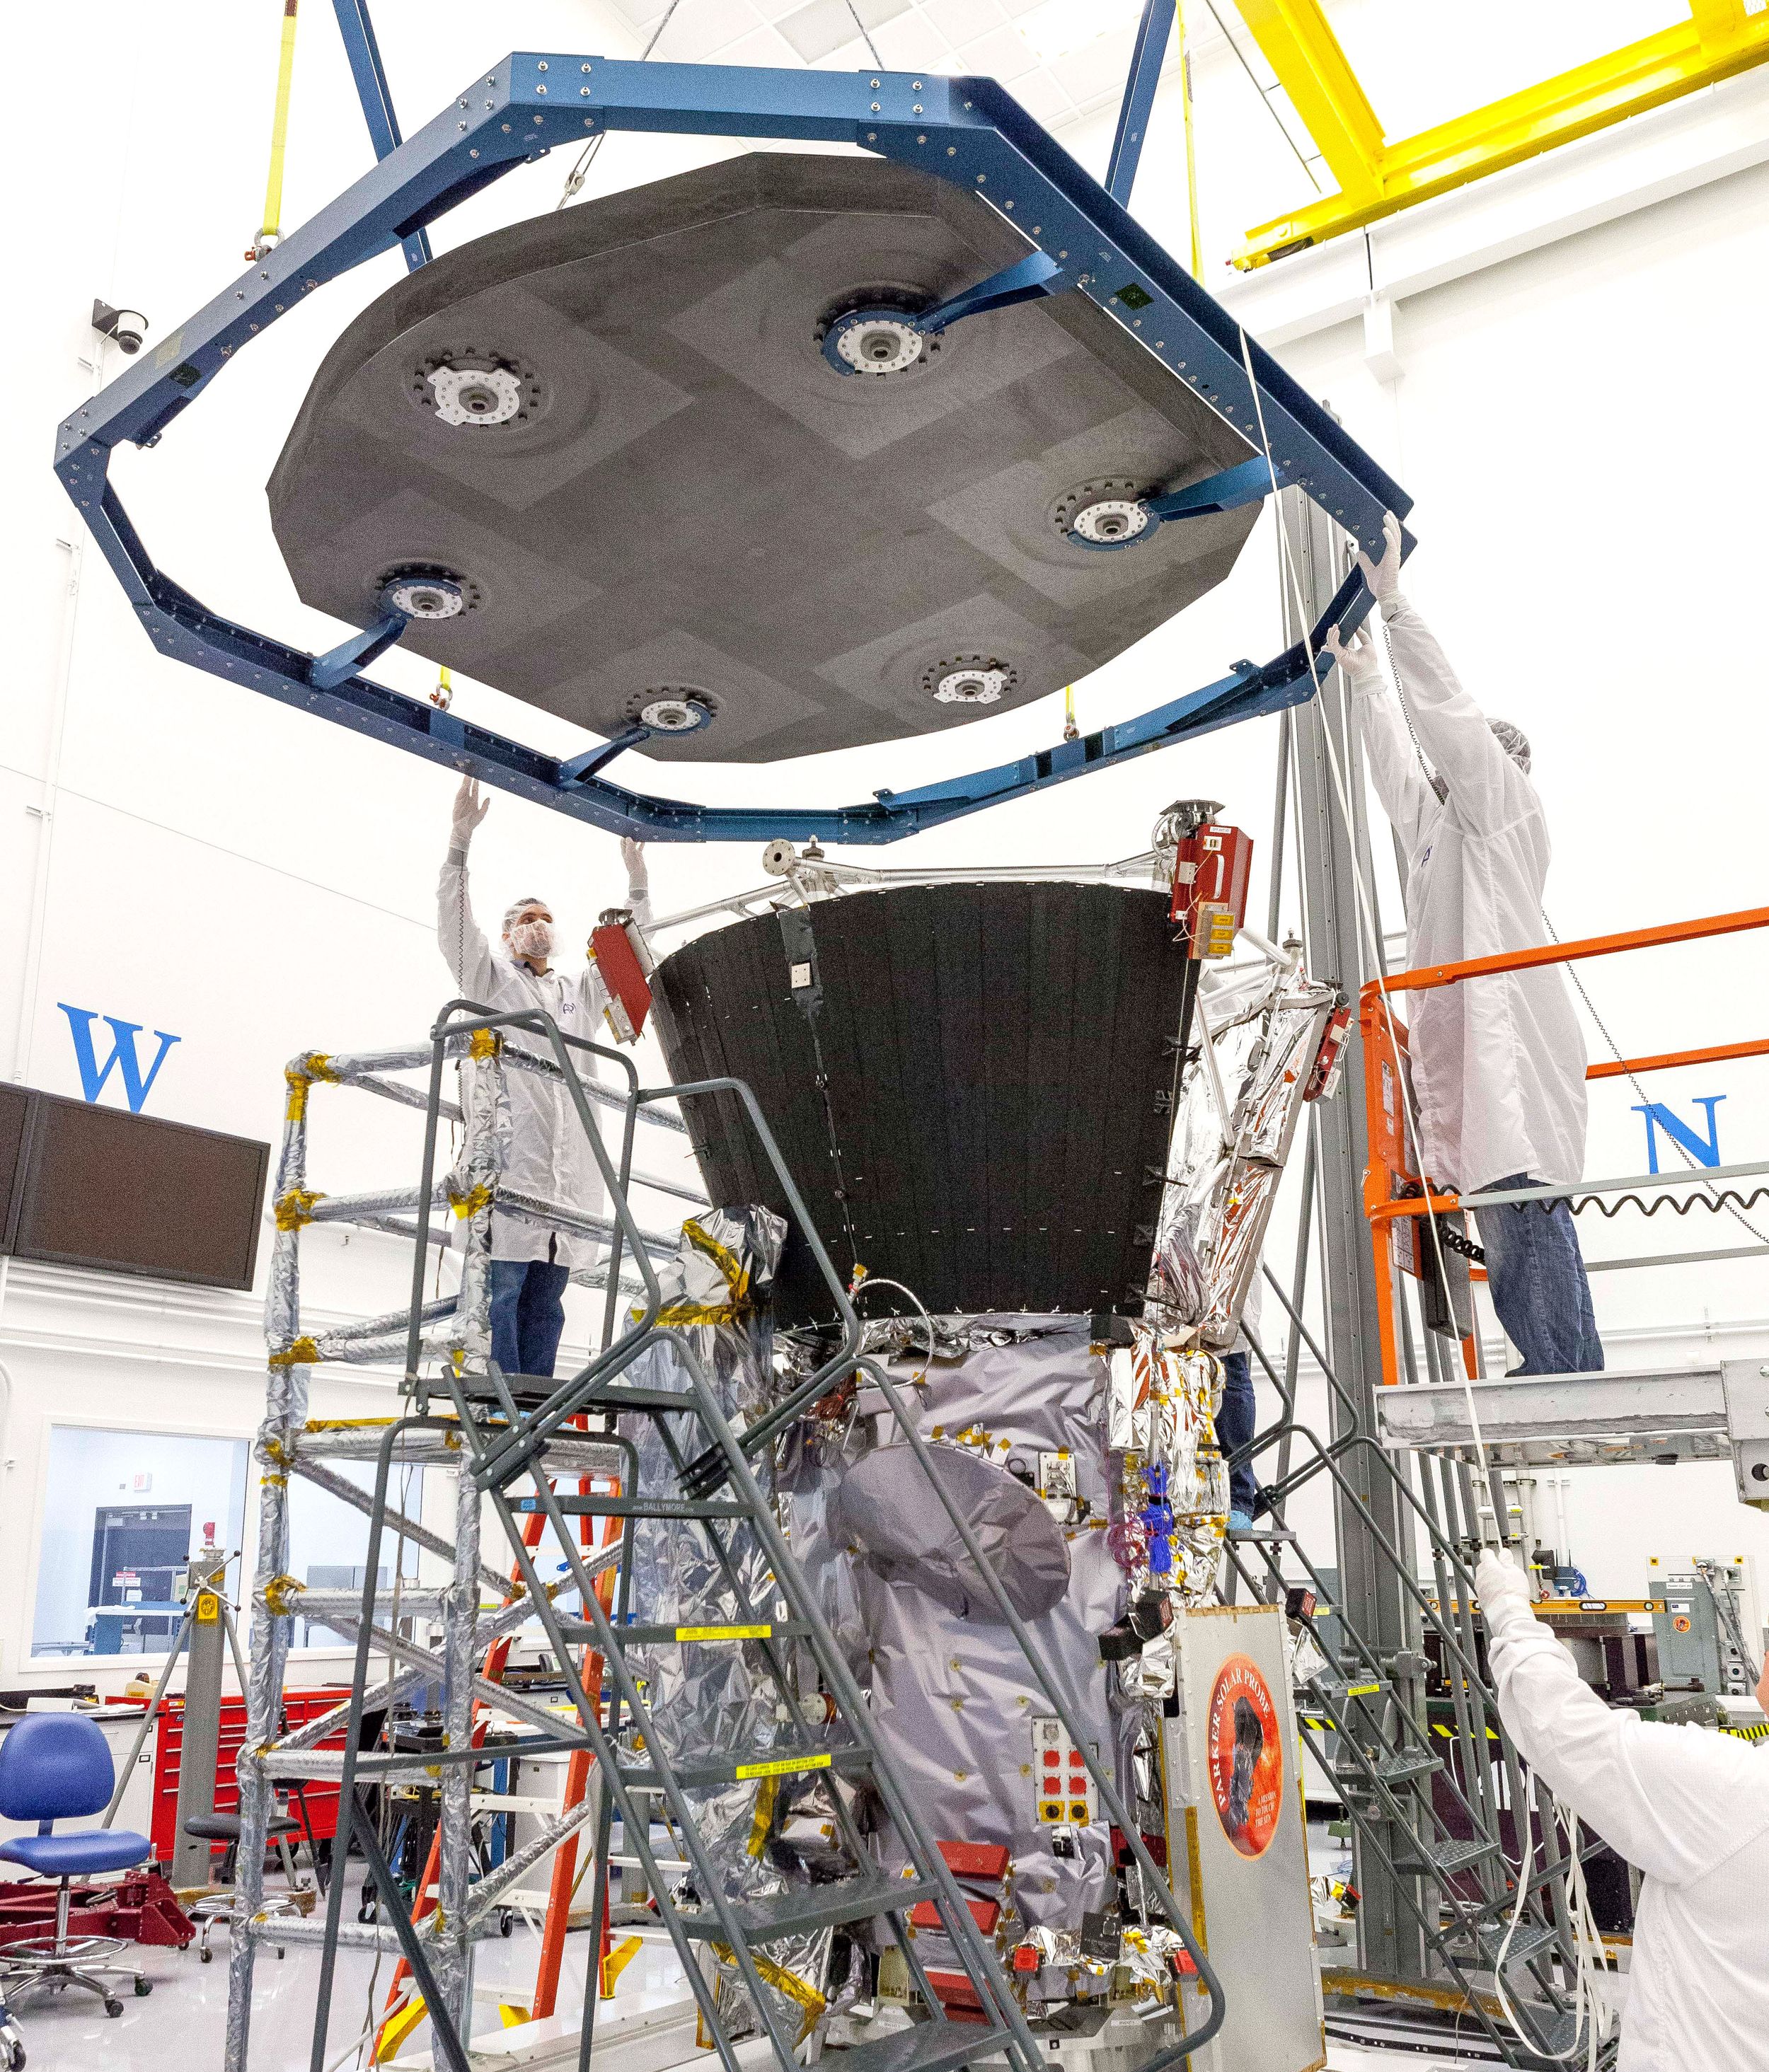 On Sept. 21, 2017, engineers at the Johns Hopkins University Applied Physics Laboratory in Laurel, Maryland, lowered the thermal protection system – the heat shield – onto the spacecraft for a test of alignment as part of integration and testing.